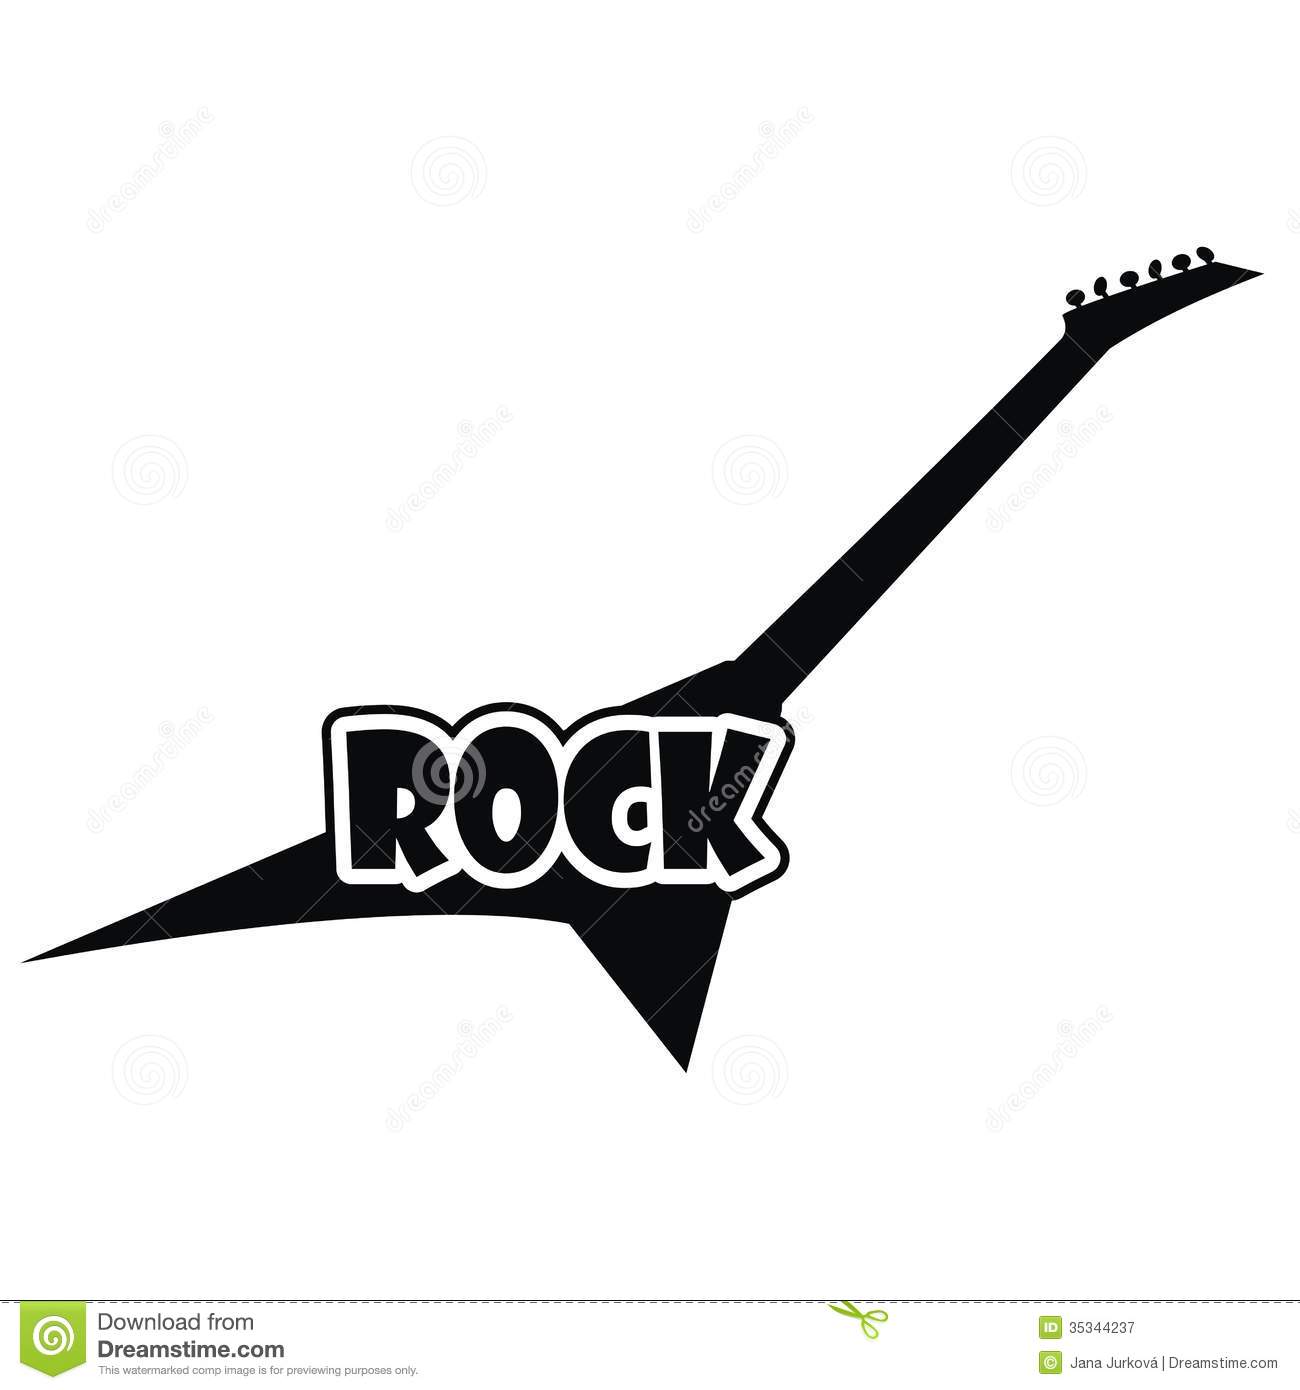 Rock Guitar   Silhouette Royalty Free Stock Photography   Image